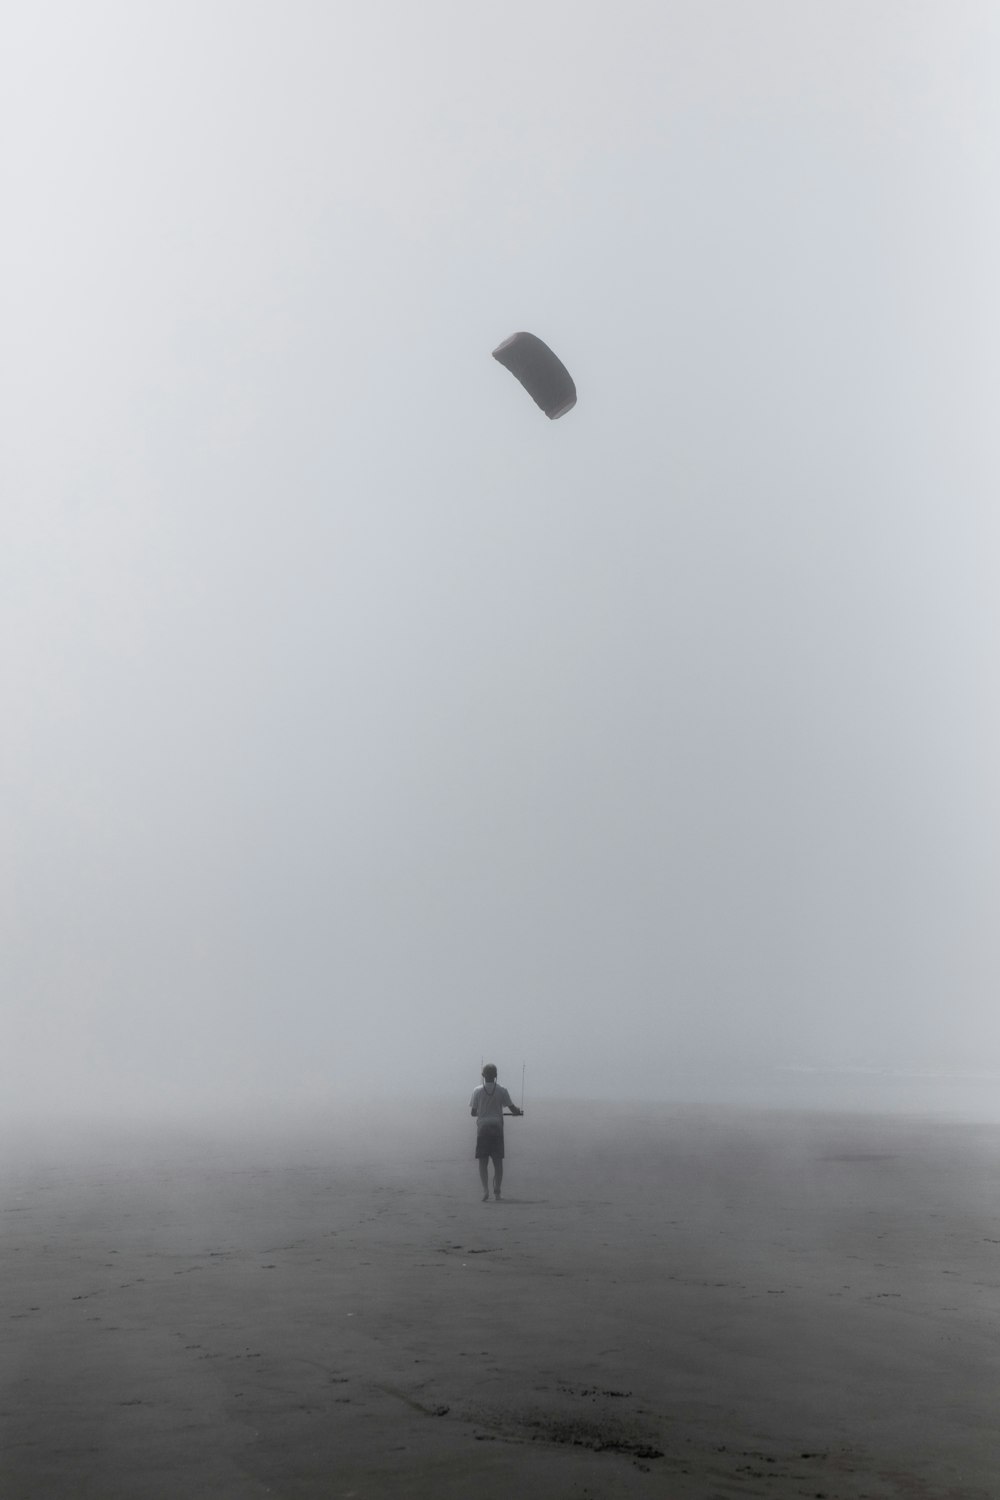 grayscale photography of person flying kite